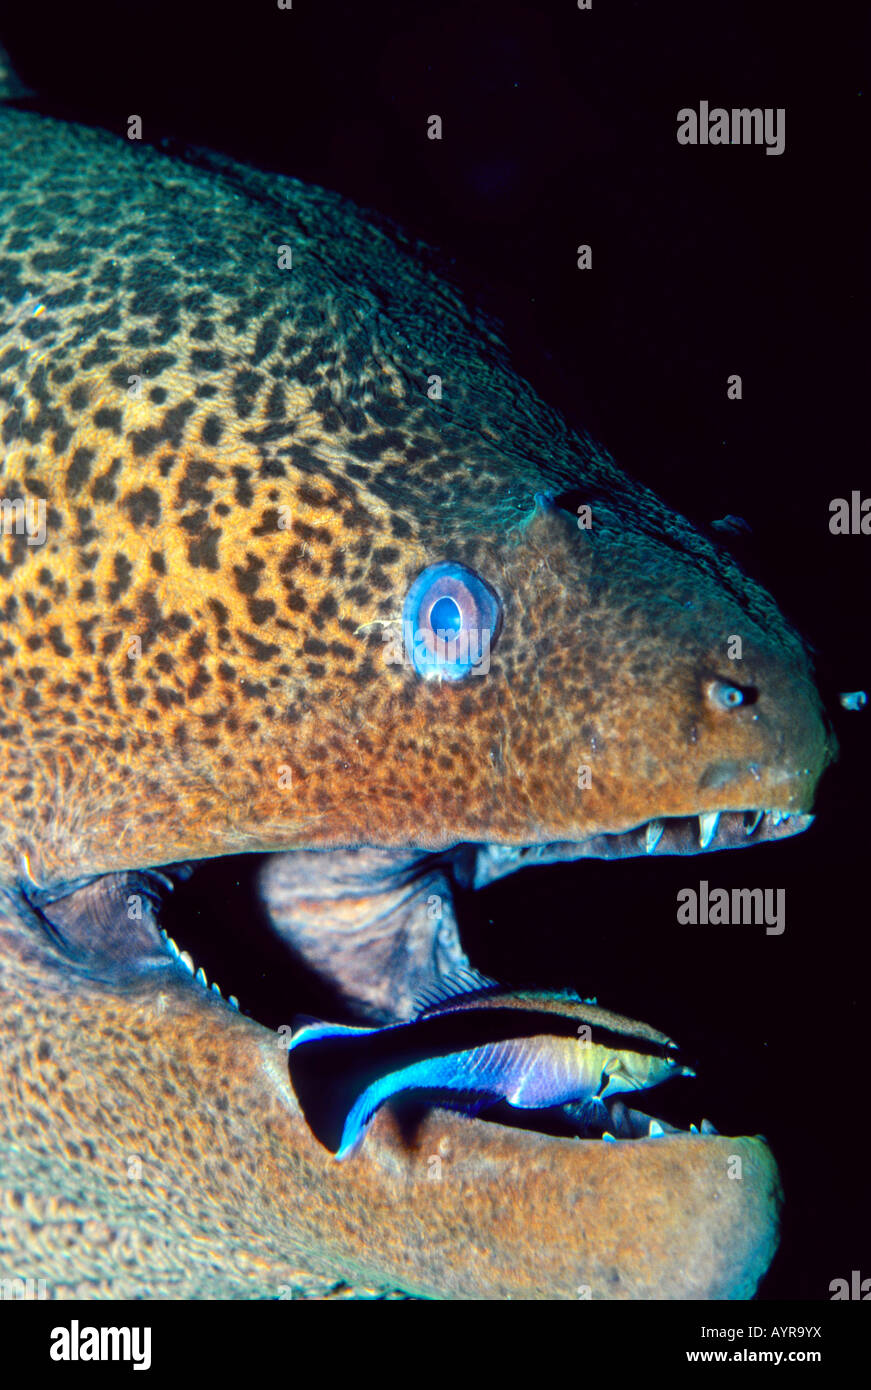 Undulated Moray Eel or Leopard Moray (Gymnothorax undulatus) with cleaner wrasse, Red Sea Stock Photo